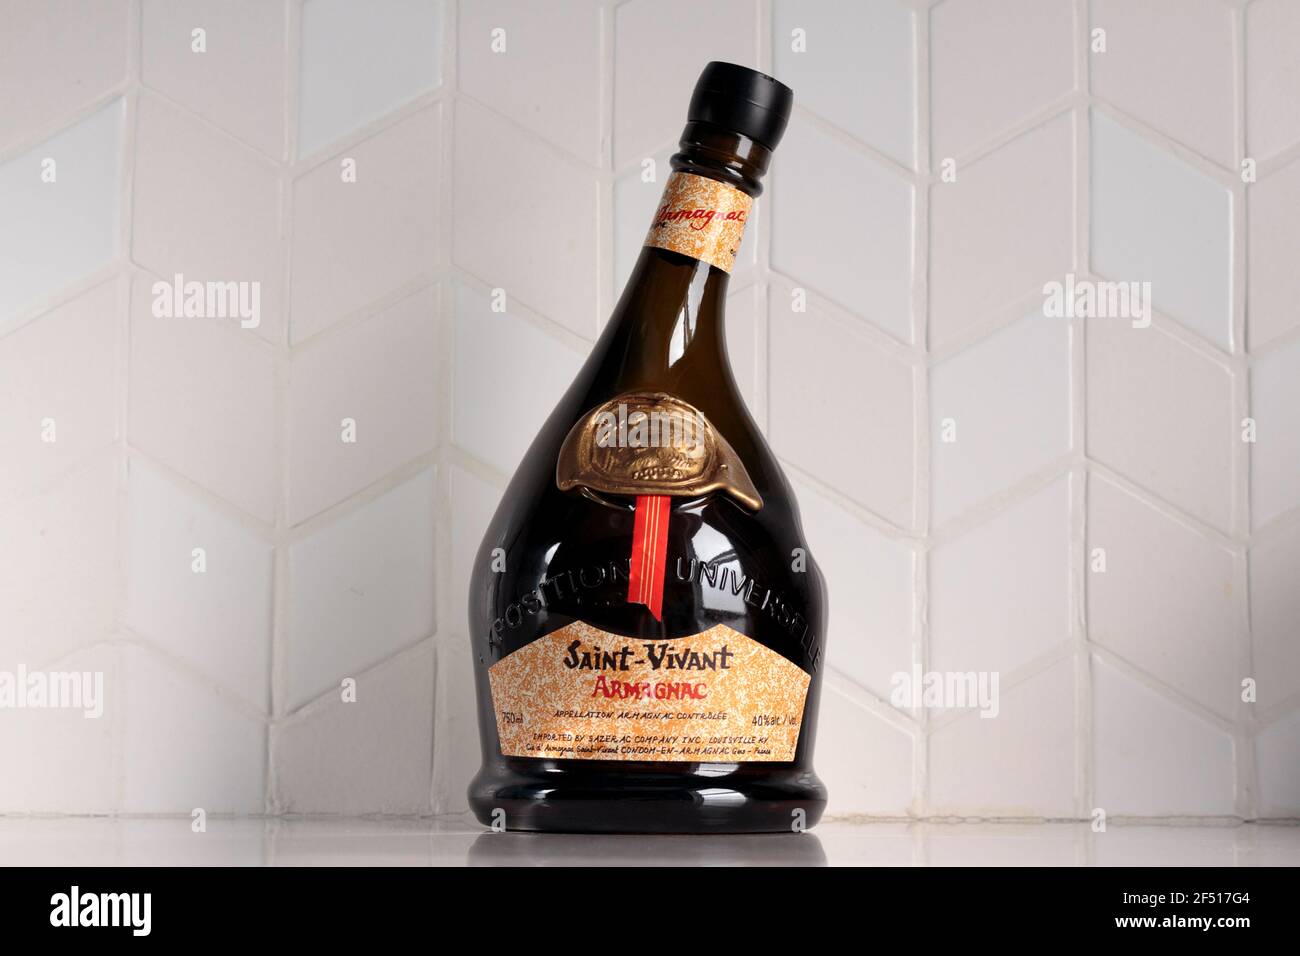 bottle of Saint-Vivant Armagnac, a smooth, high quality French brandy from the region of Gascony Stock Photo